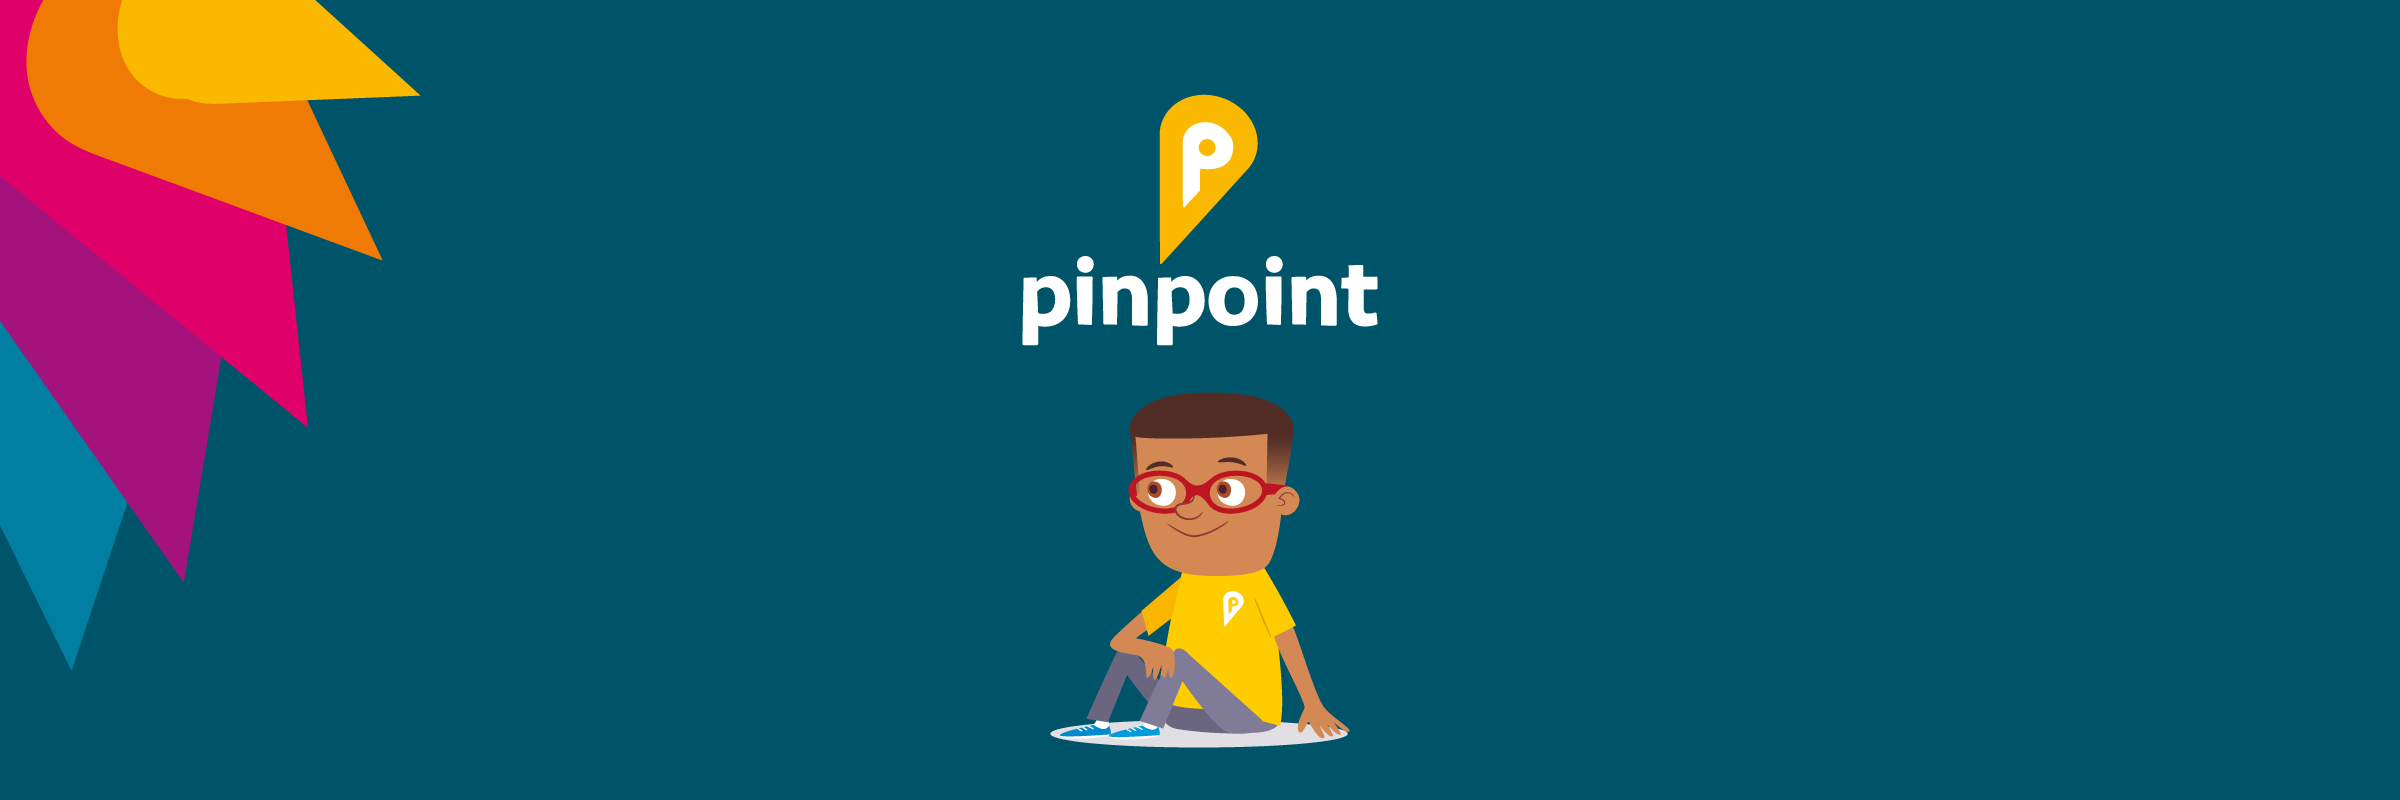 Pinpoint Family banner 